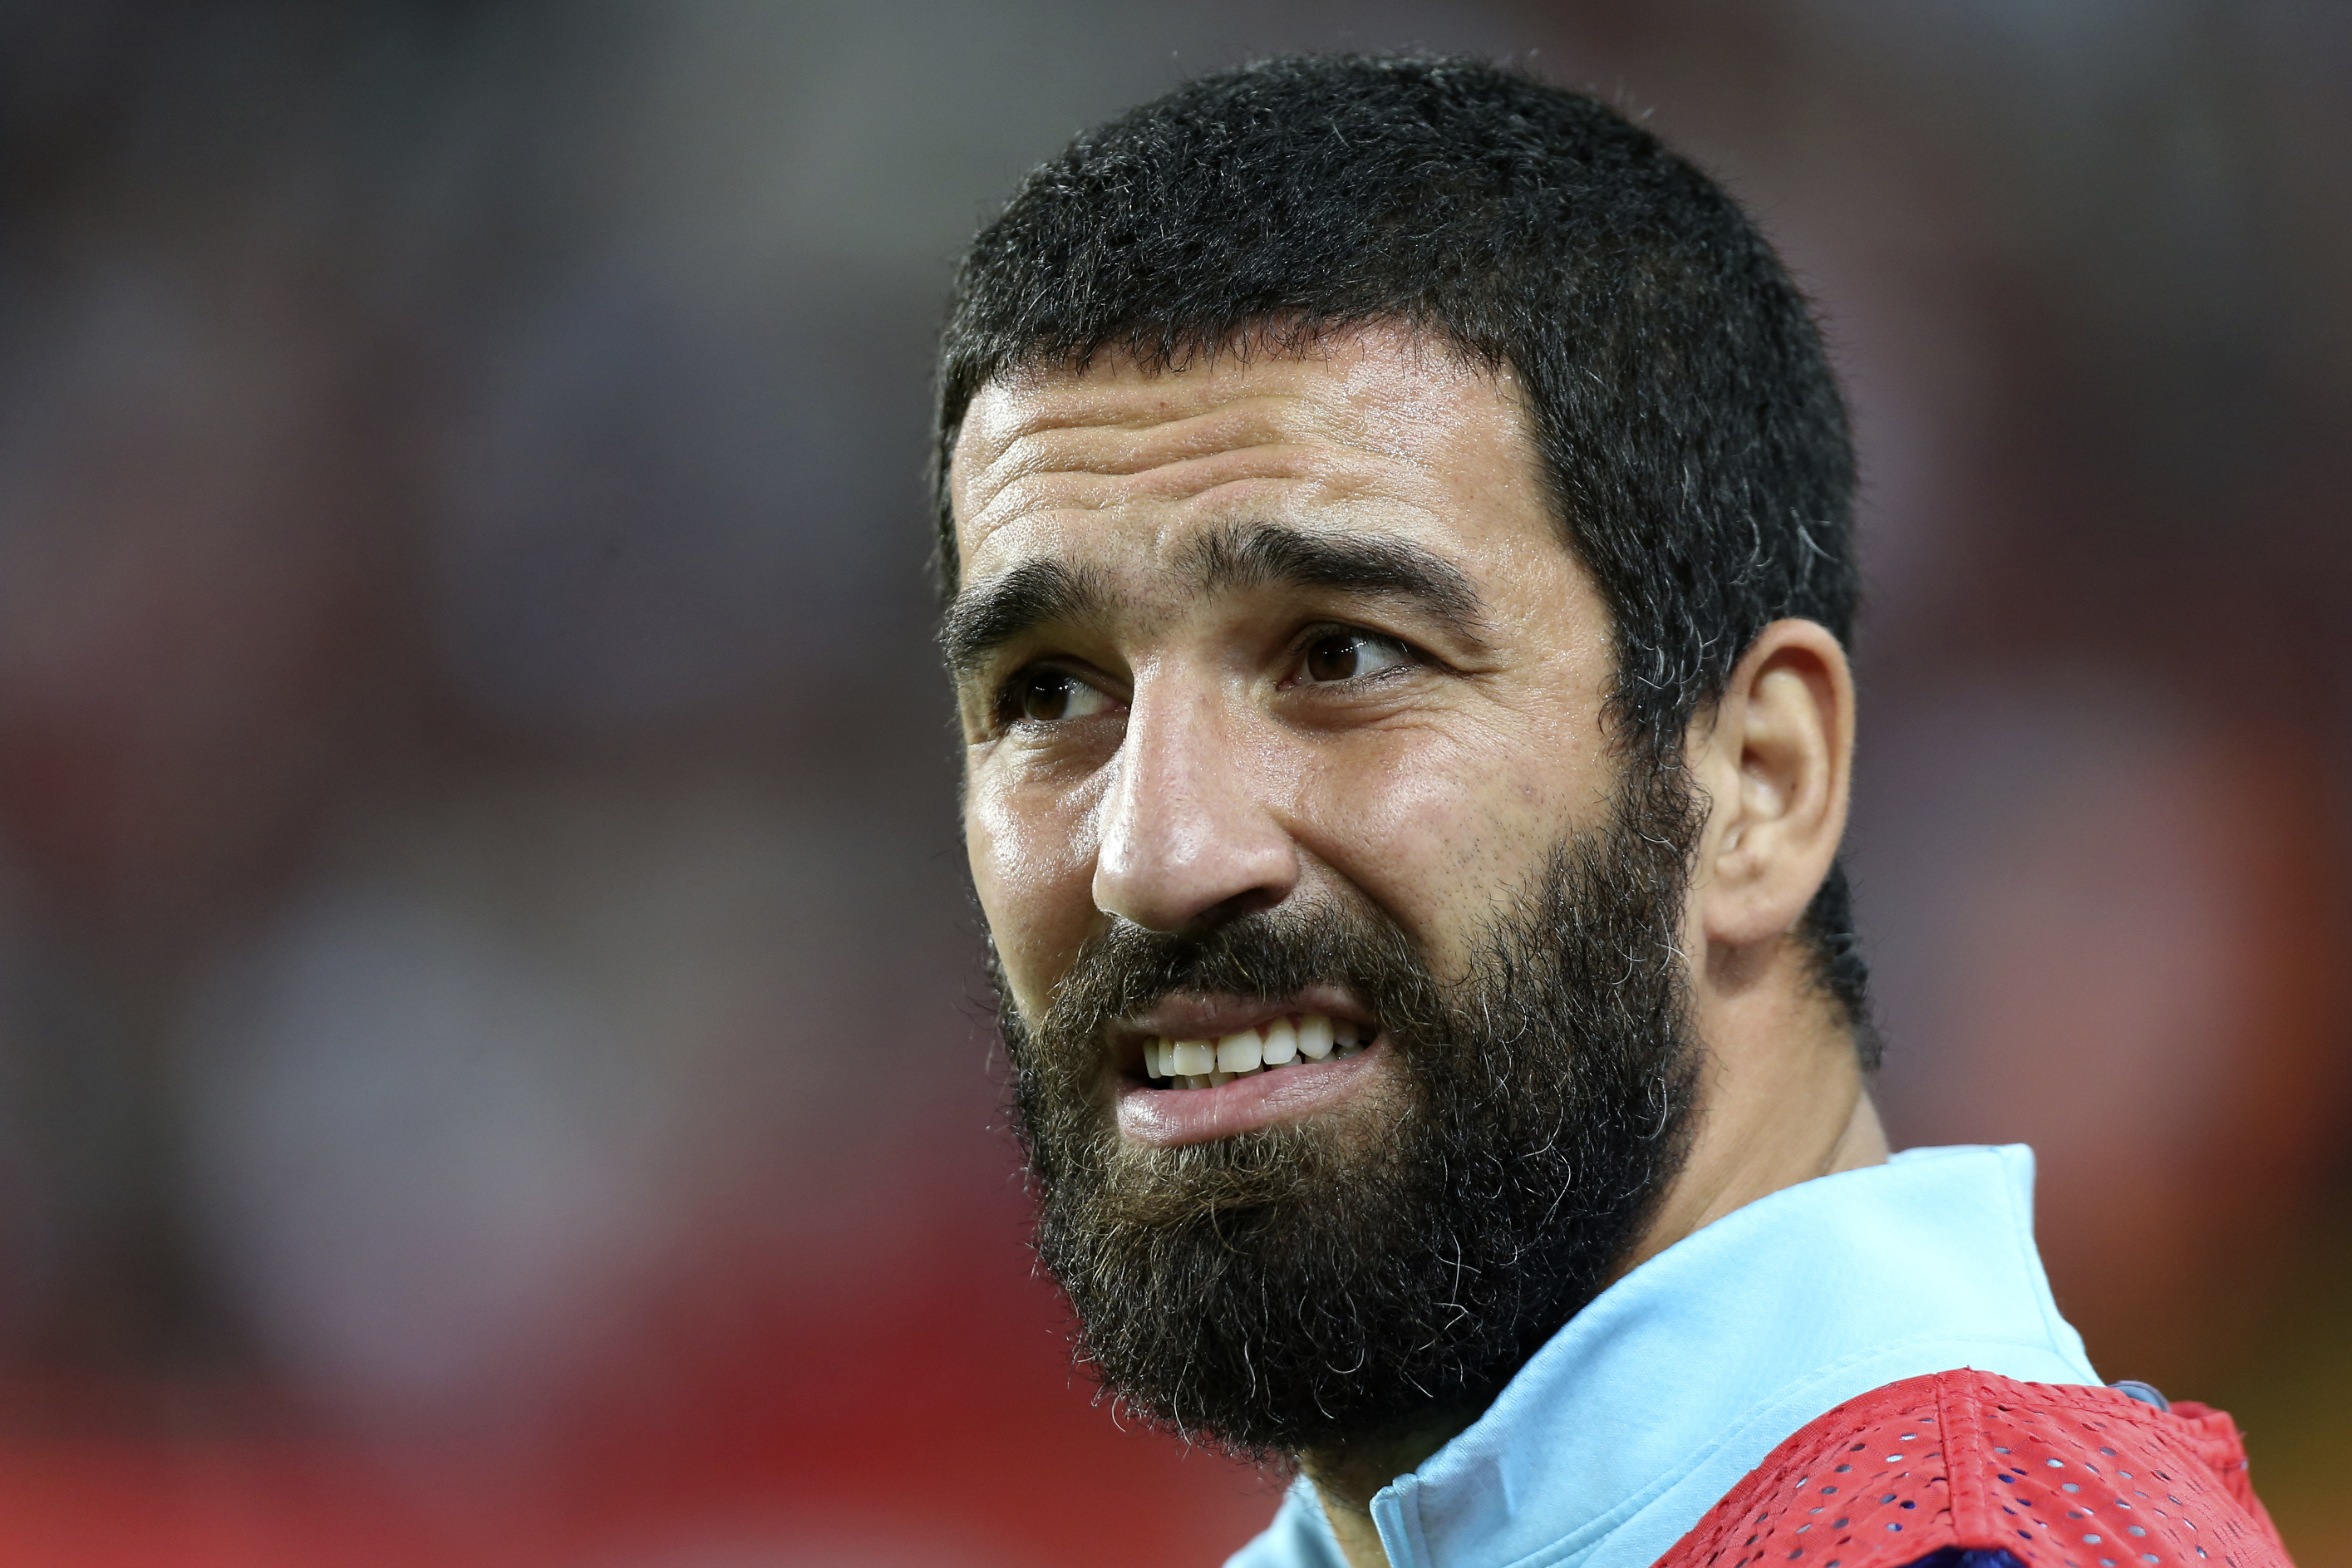 Turkey's Arda Turan looks on before the 2018 World Cup group I qualifying football match between Turkey and Kosovo, in Antalya on November 12, 2016. / AFP / -        (Photo credit should read -/AFP/Getty Images)